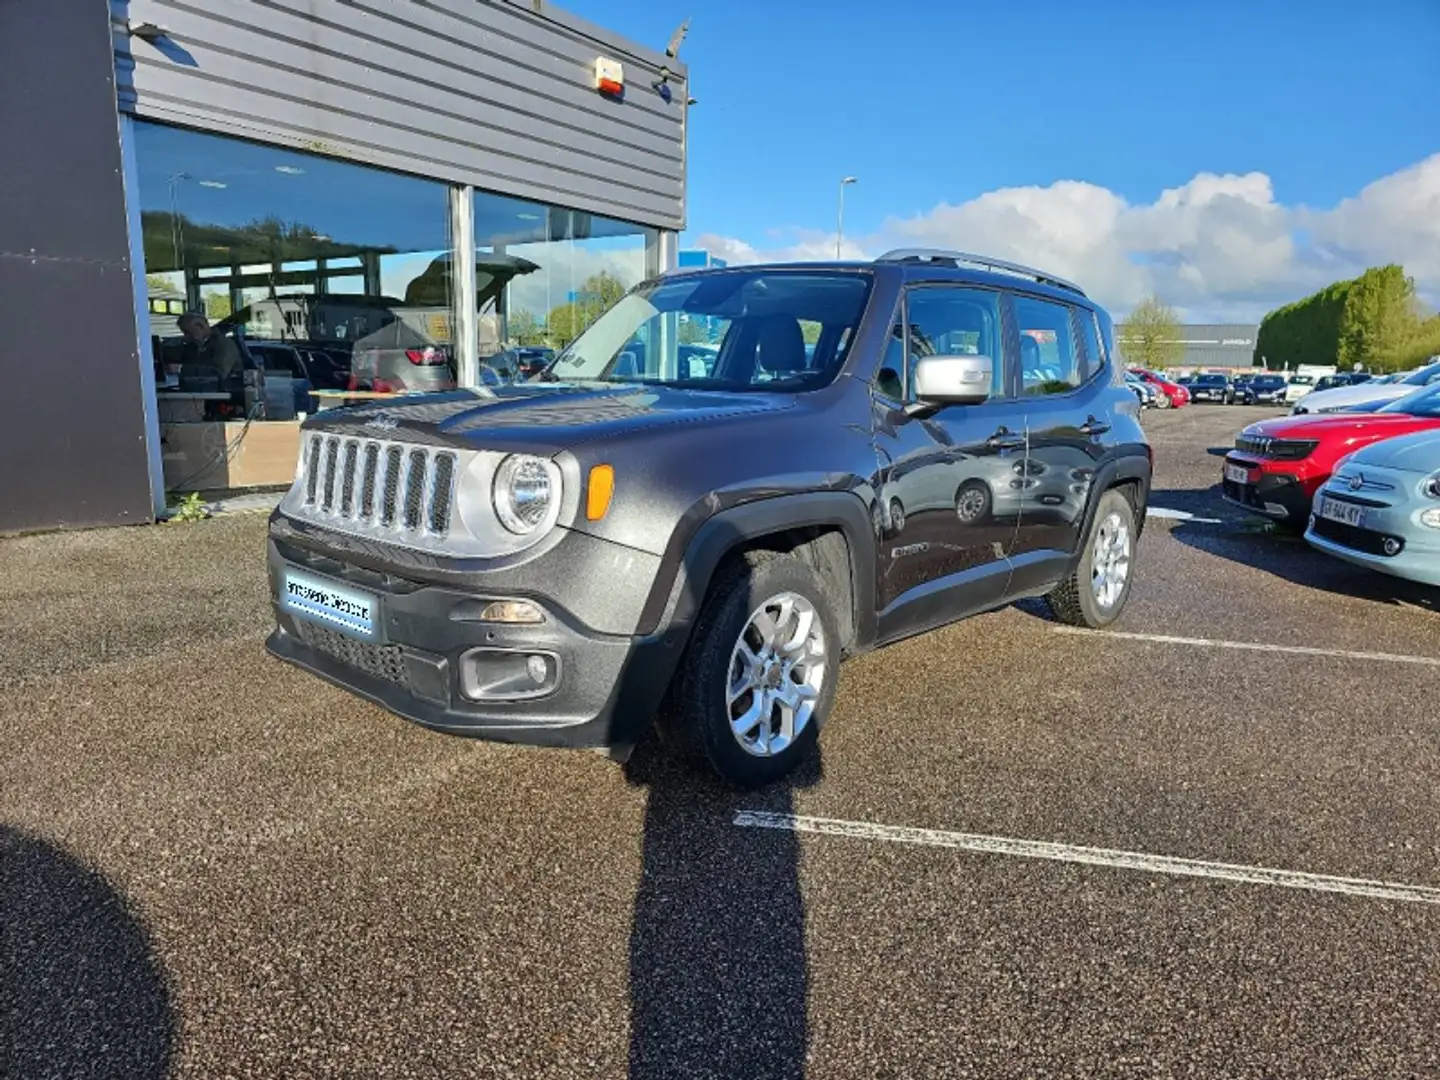 Jeep Renegade 1.4 MultiAir S\u0026S 140ch Limited - 1